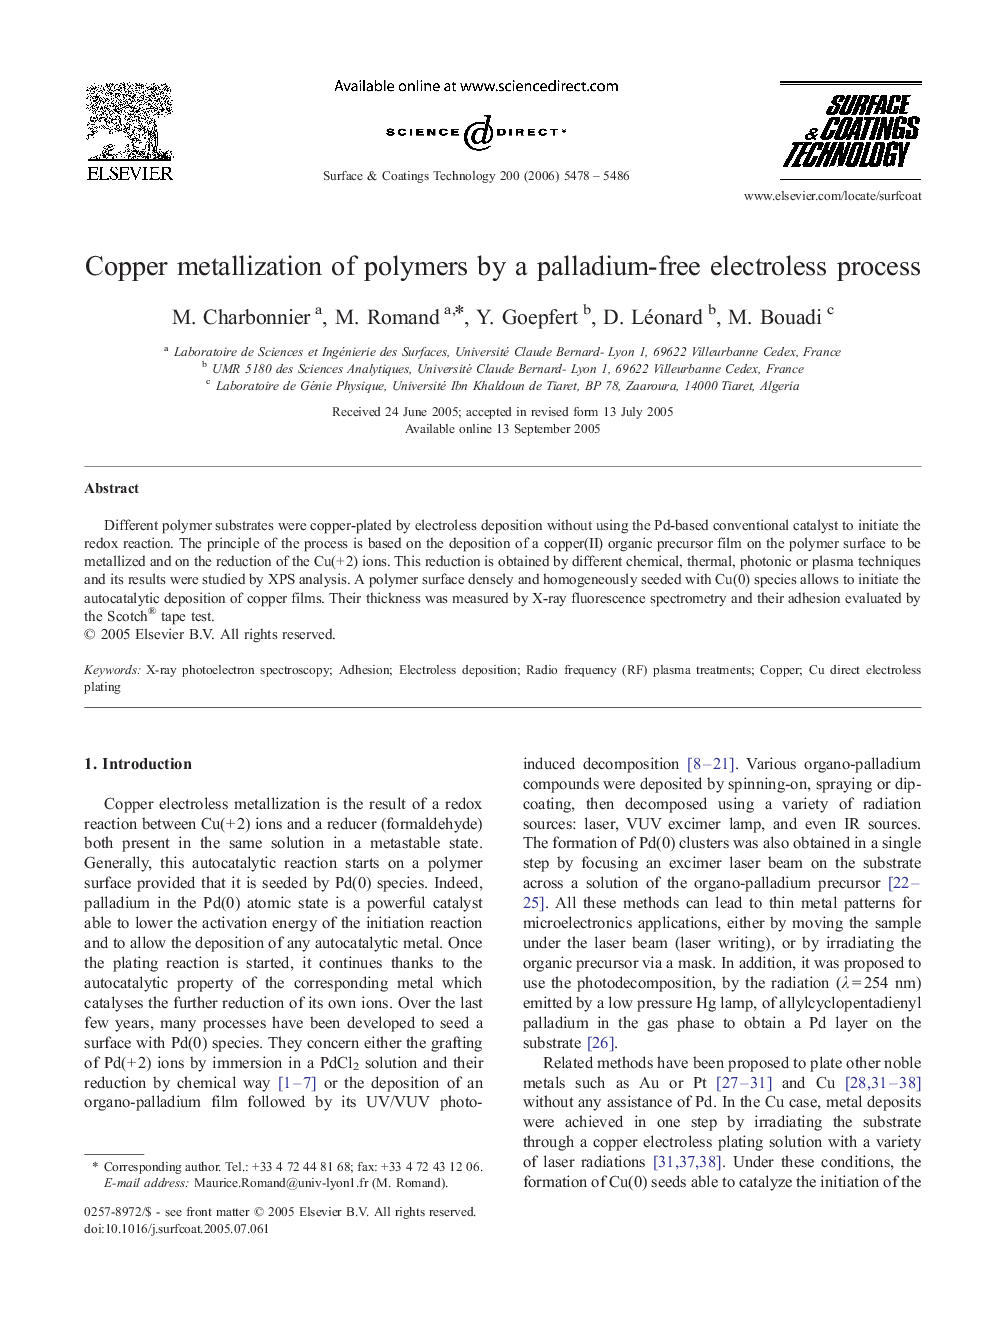 Copper metallization of polymers by a palladium-free electroless process